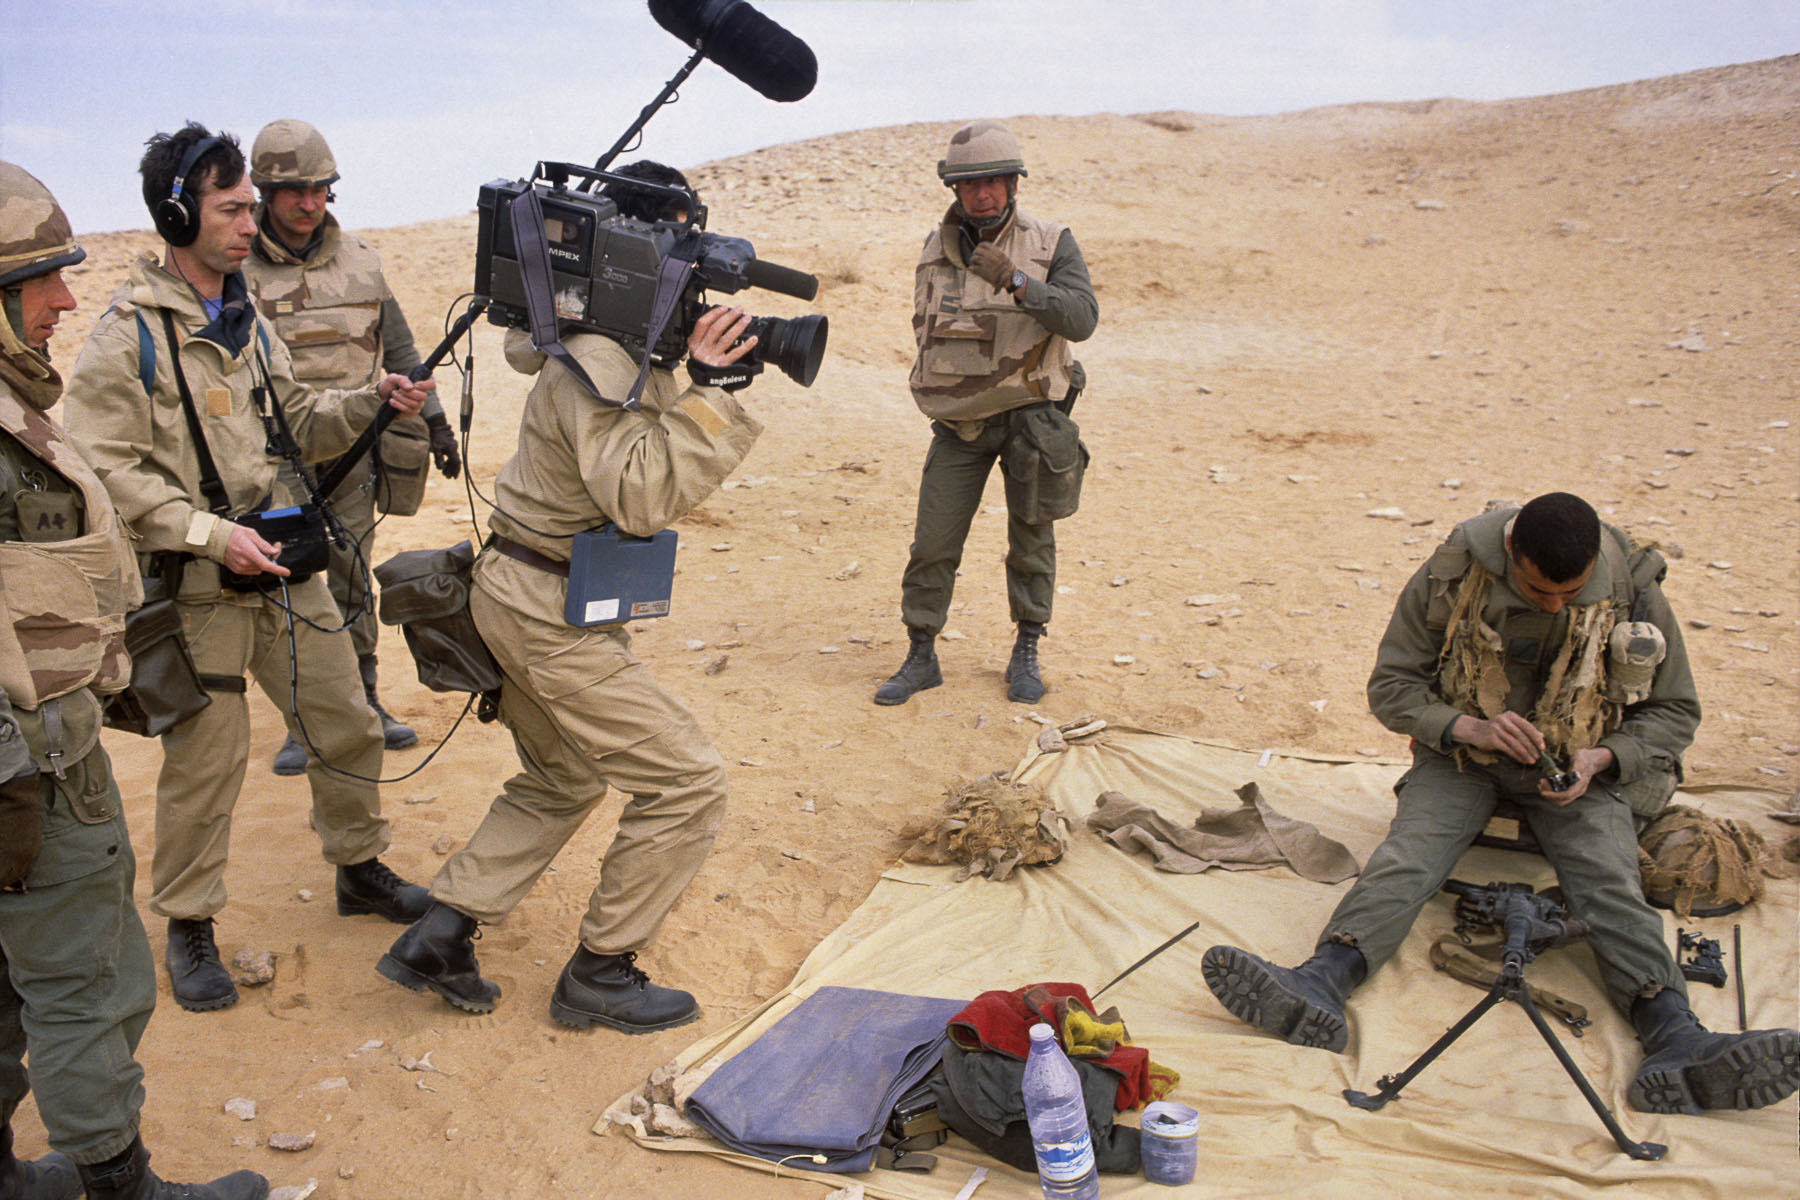 A French TV crew films a French Foreign Legion soldier in January 1991